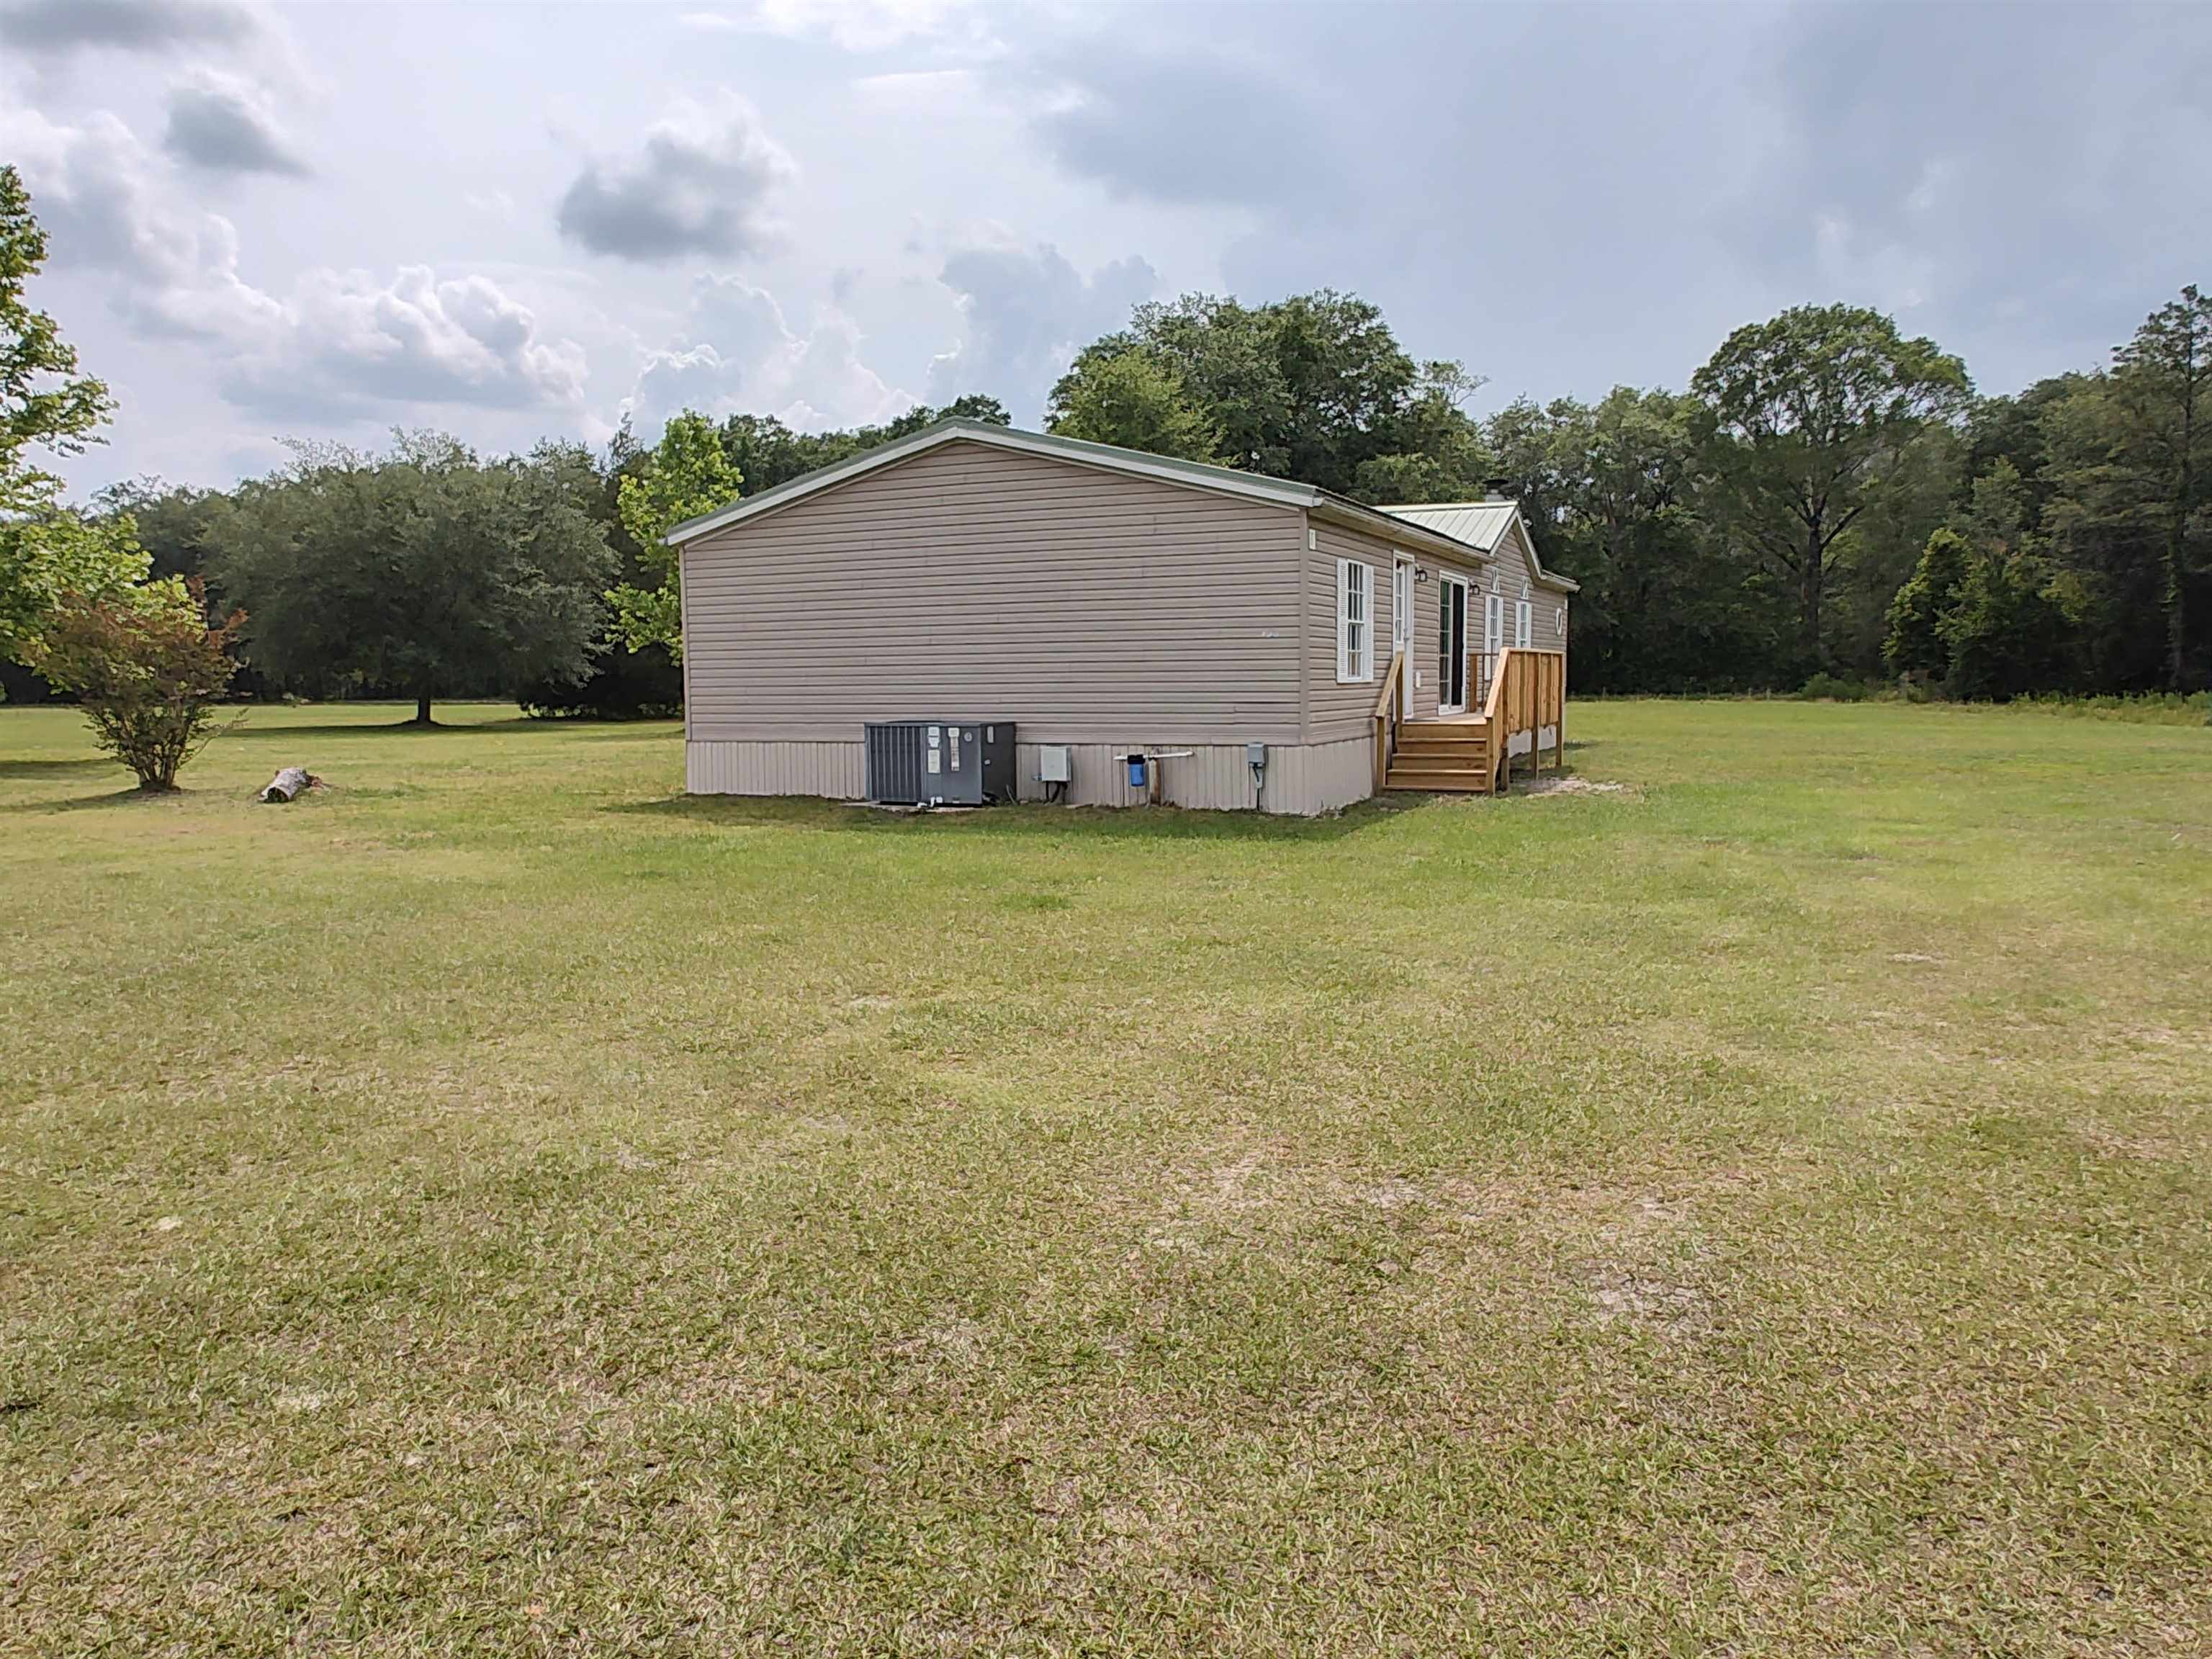 4345 Starling Ln,PERRY,Florida 32347,3 Bedrooms Bedrooms,2 BathroomsBathrooms,Manuf/mobile home,4345 Starling Ln,358723